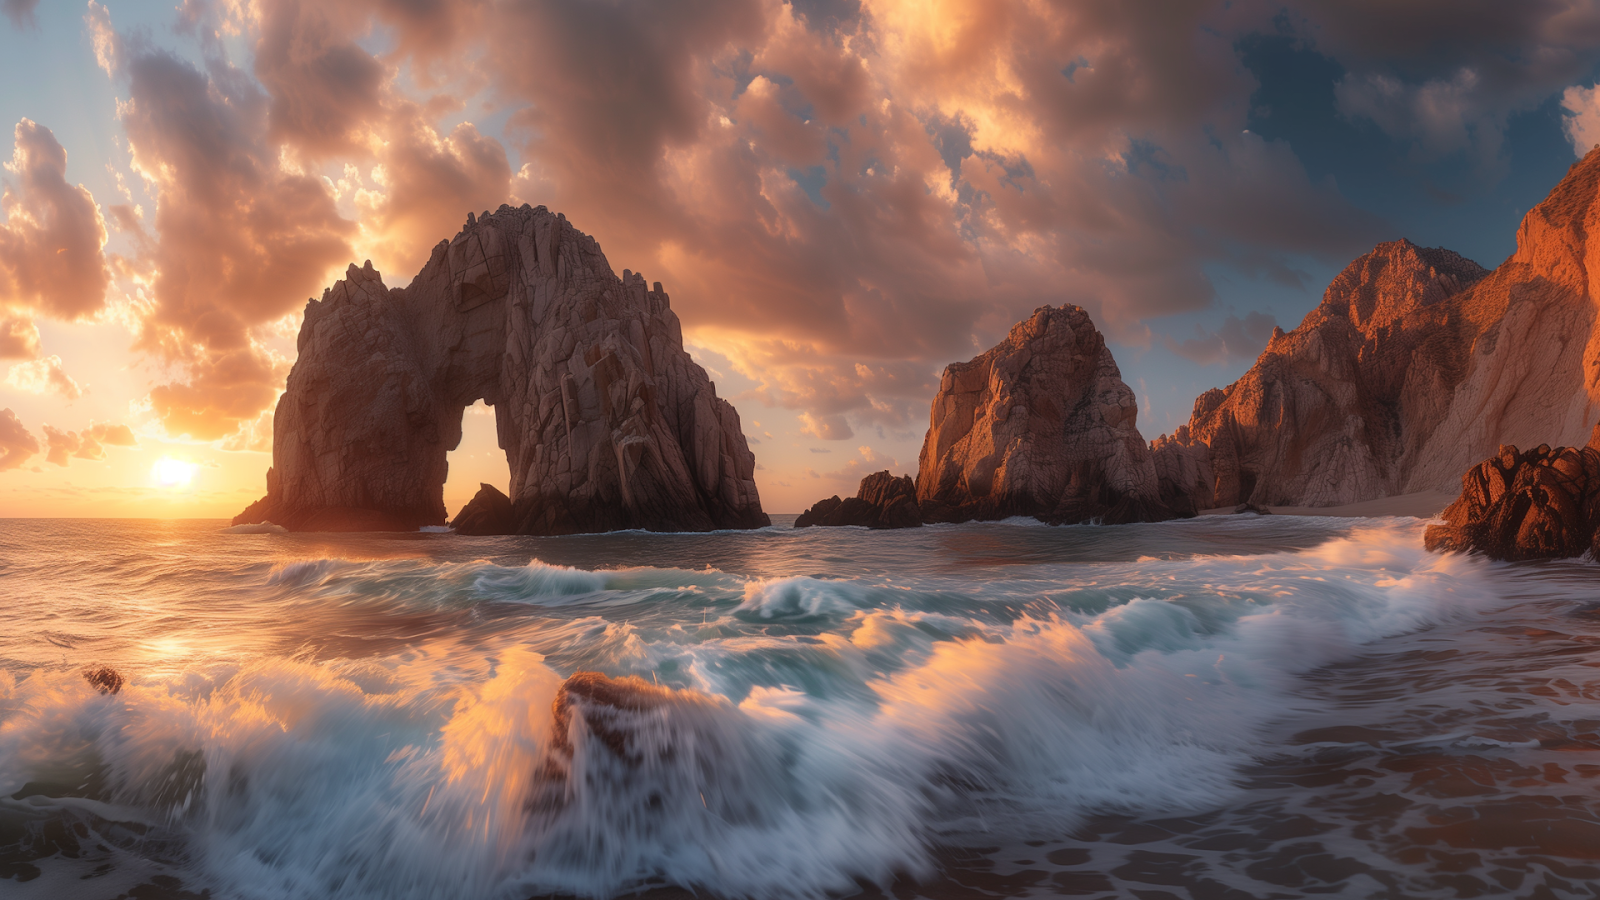 El Arco de Cabo San Lucas at golden hour, warm sunlight illuminating the rock formation with gentle waves below.